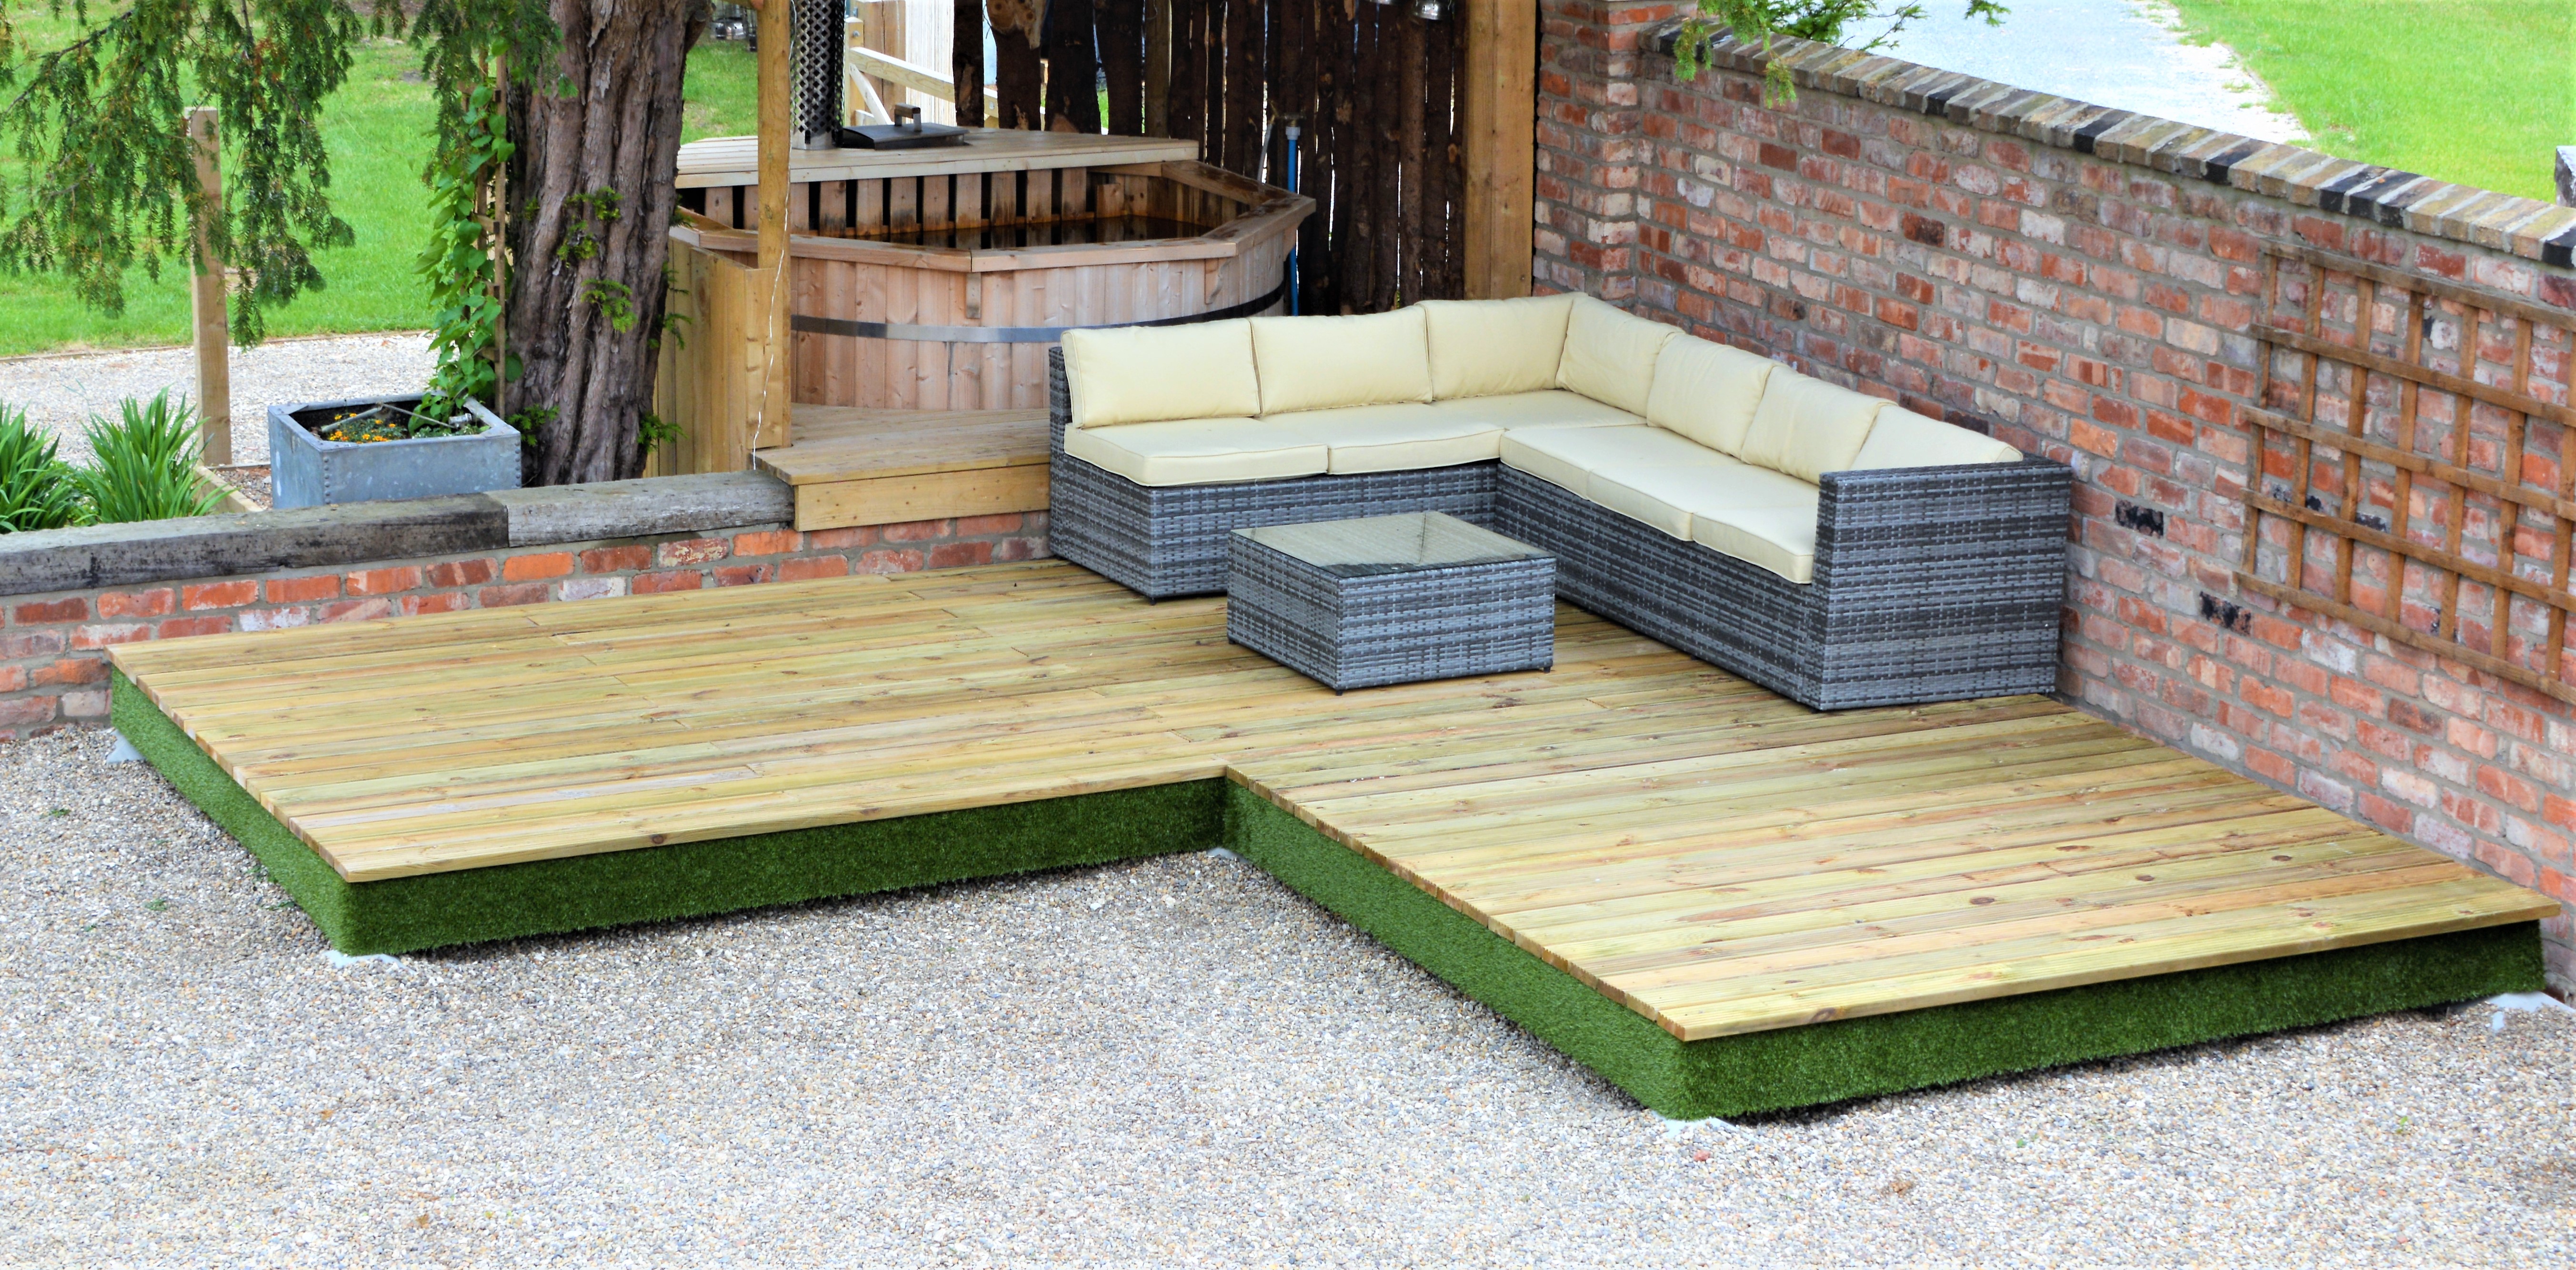 Image of Swift Deck Self-Assembly Garden Decking Kit Corner With Adjustable Foundations - 4.75 x 4.7m